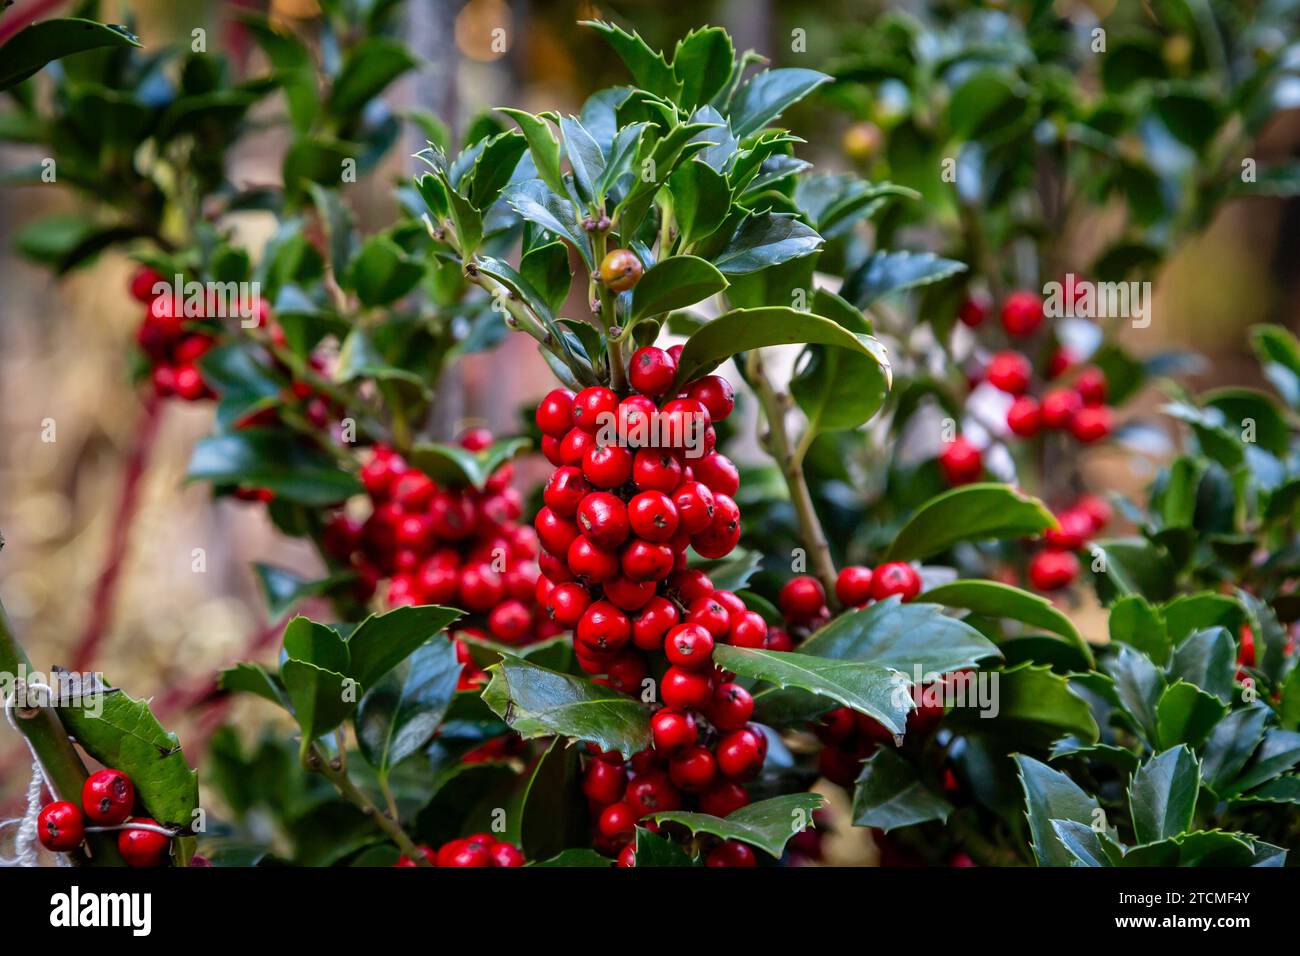 Vibrant holly berries on a bush in winter Stock Photo